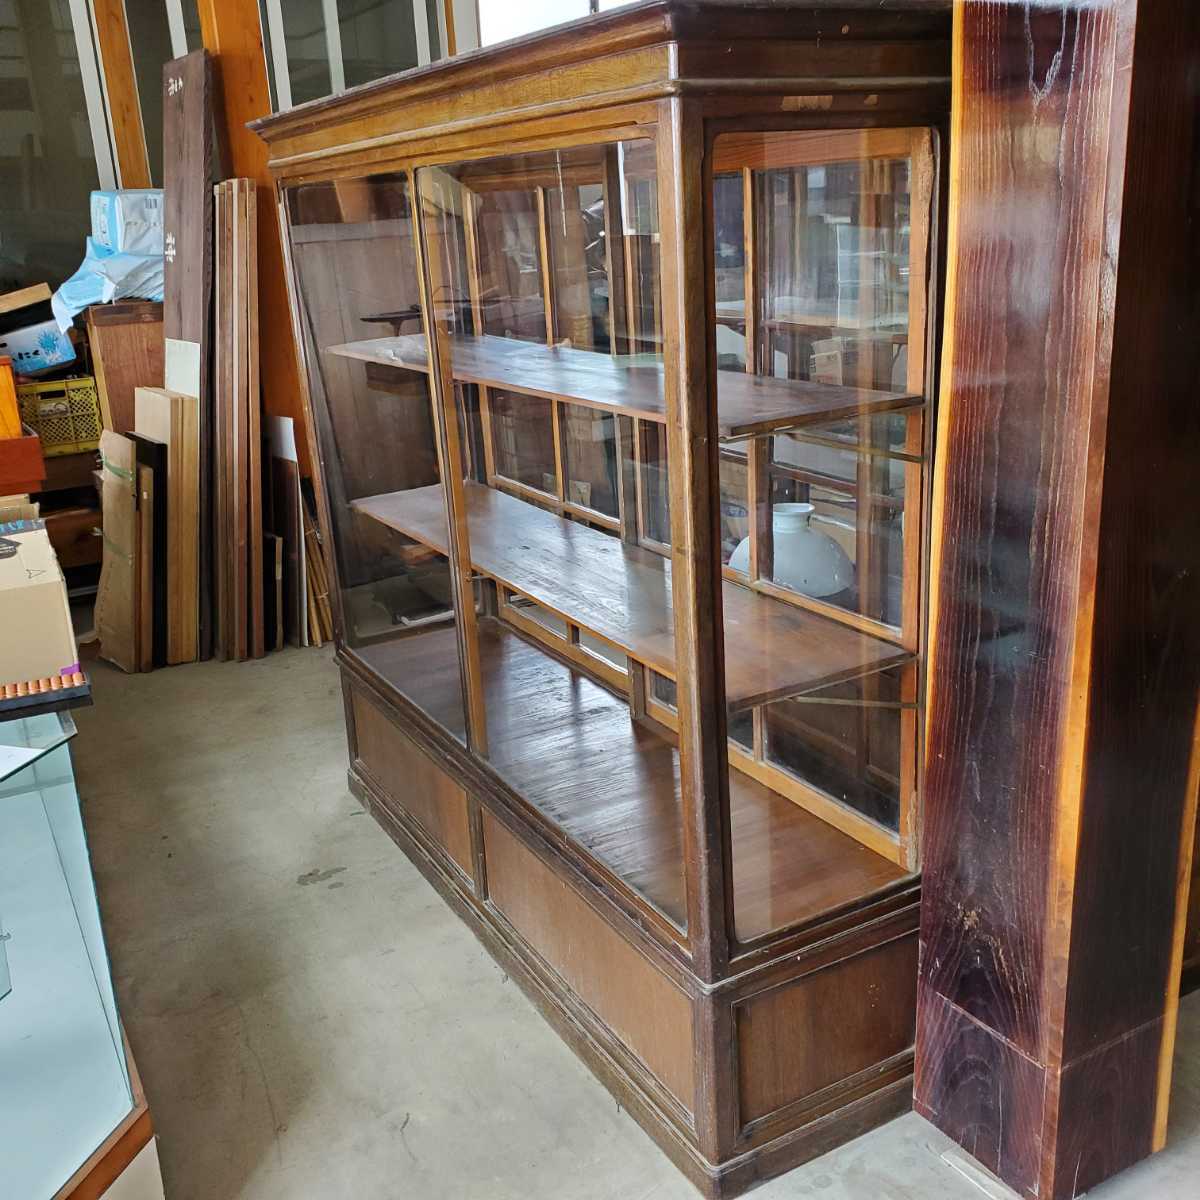  discount preliminary inspection possibility extra-large size taste ... exist .... wave glass old wooden glass case display shelf ( search display case Taisho romance No.1 receipt limitation (pick up) 